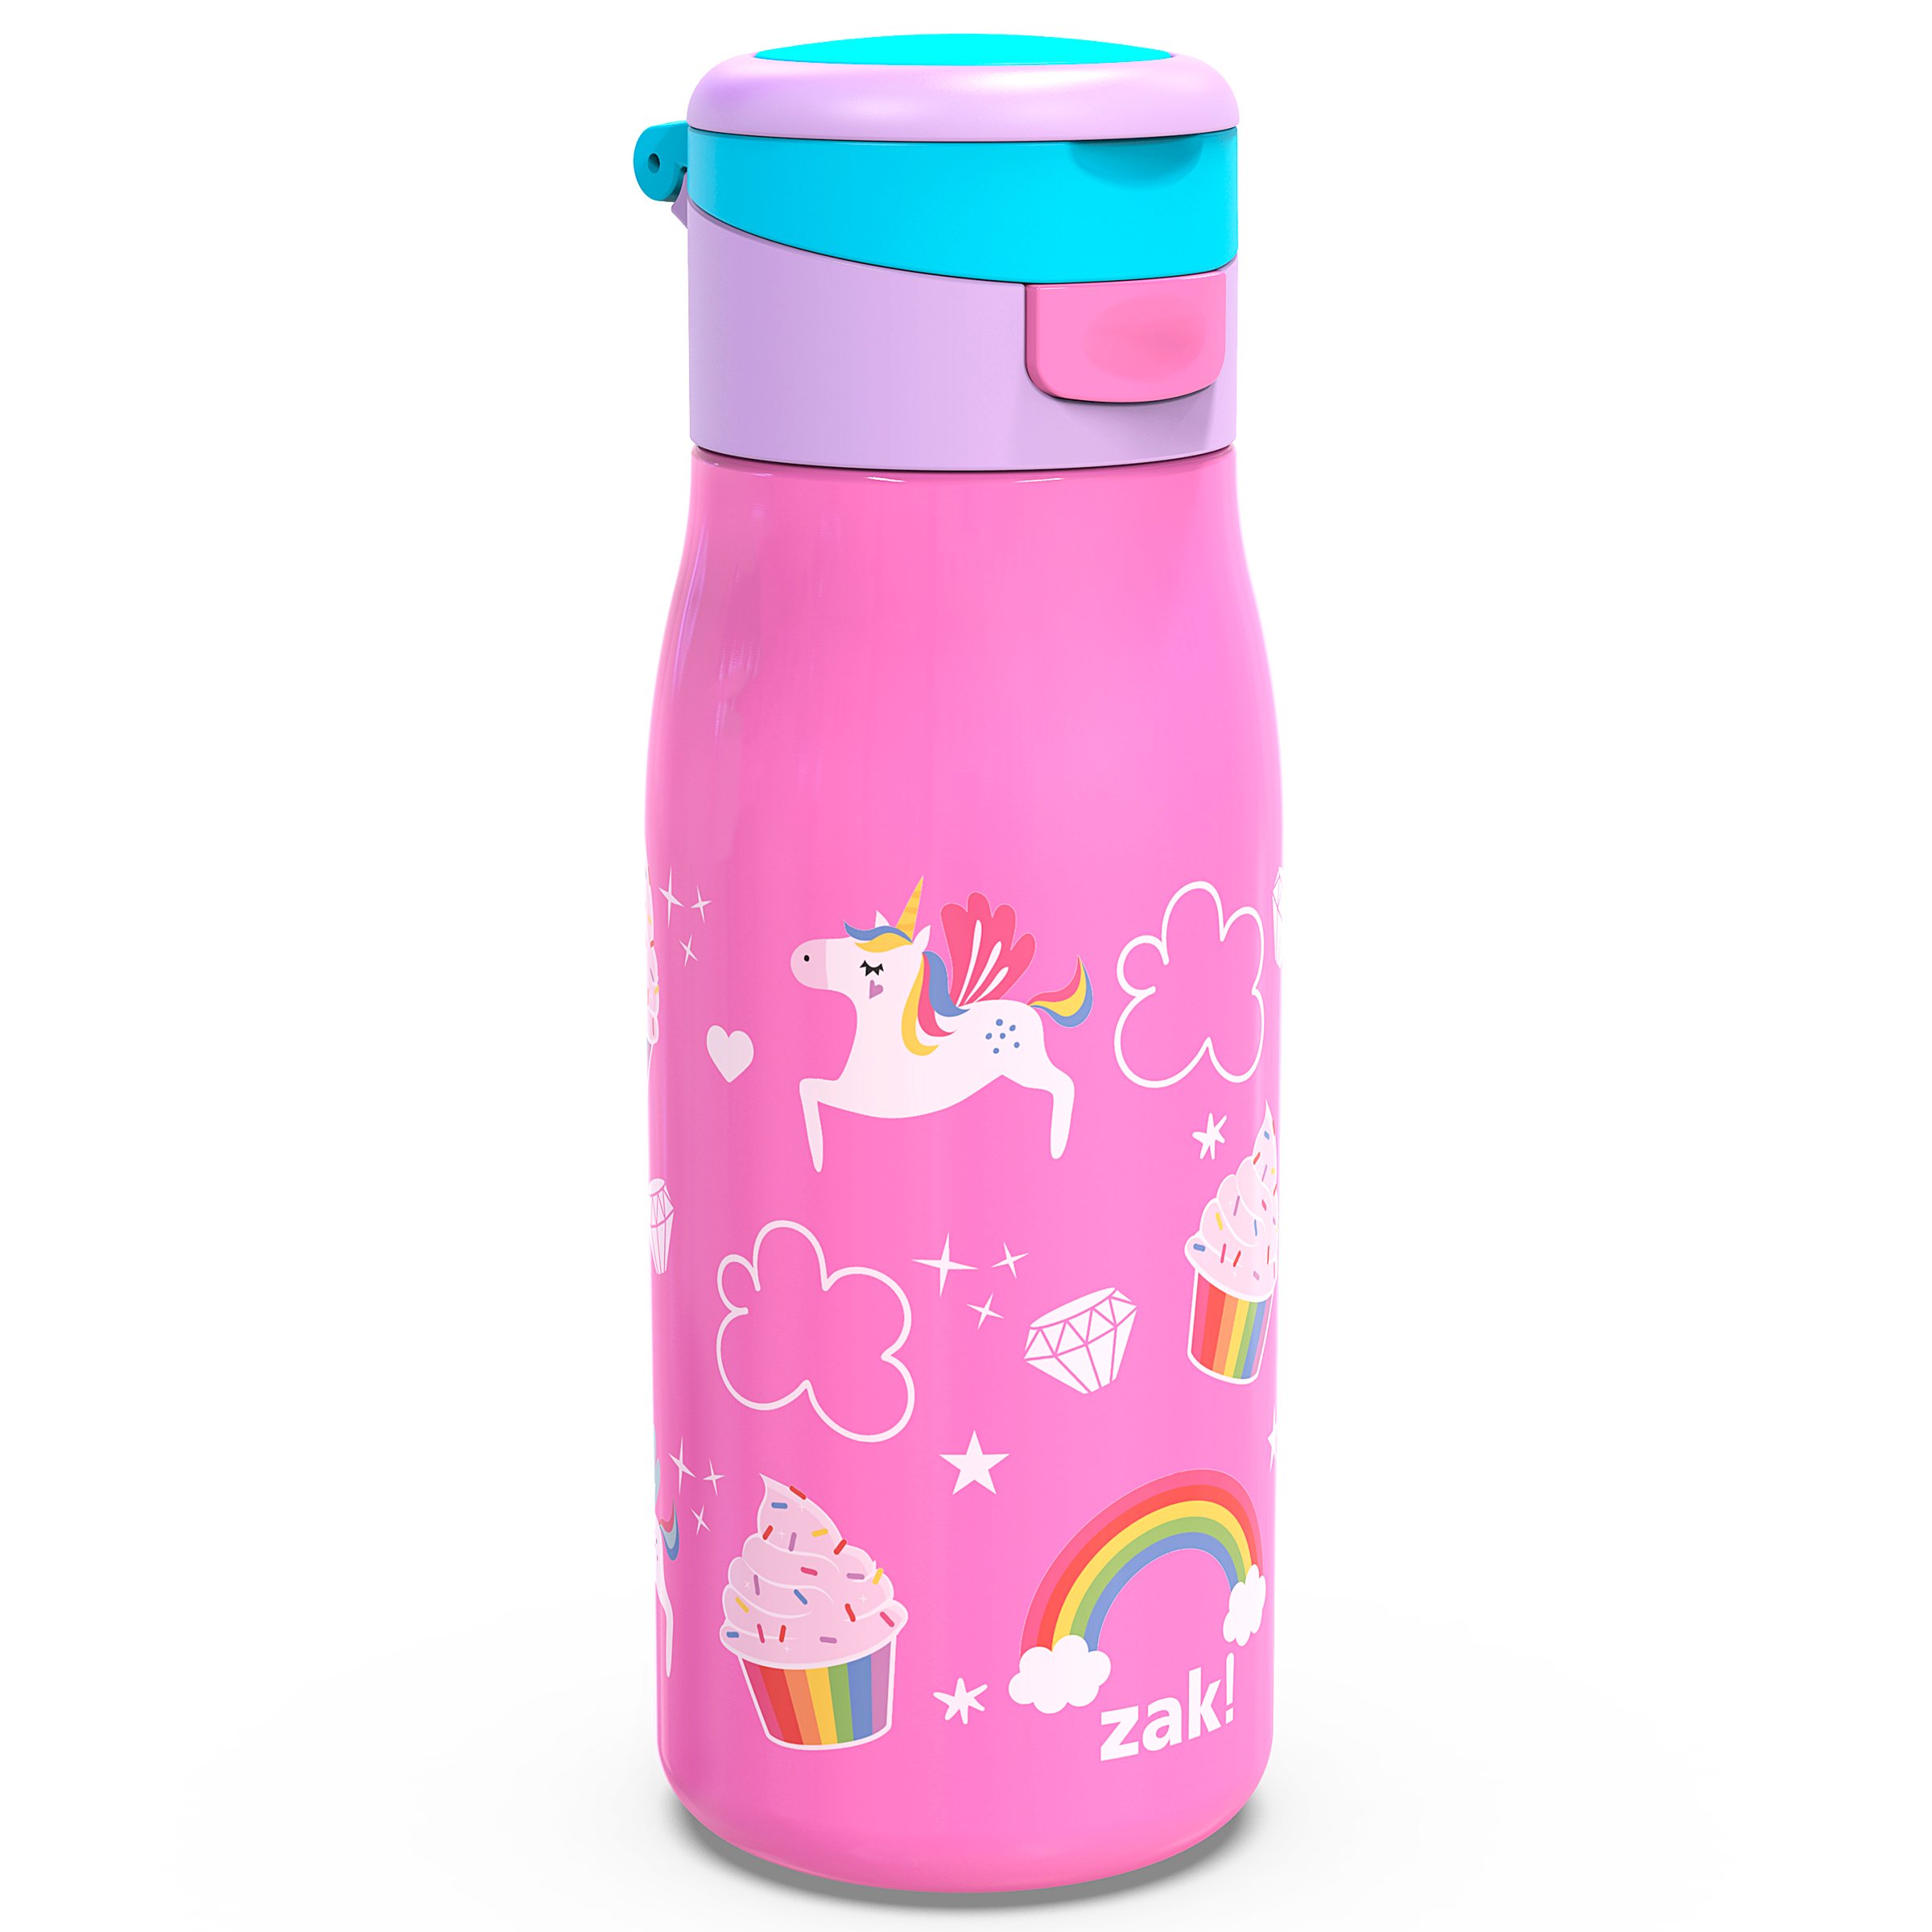 Sip by Swell Insulated Water Bottle in Unicorn Dream – Trotters